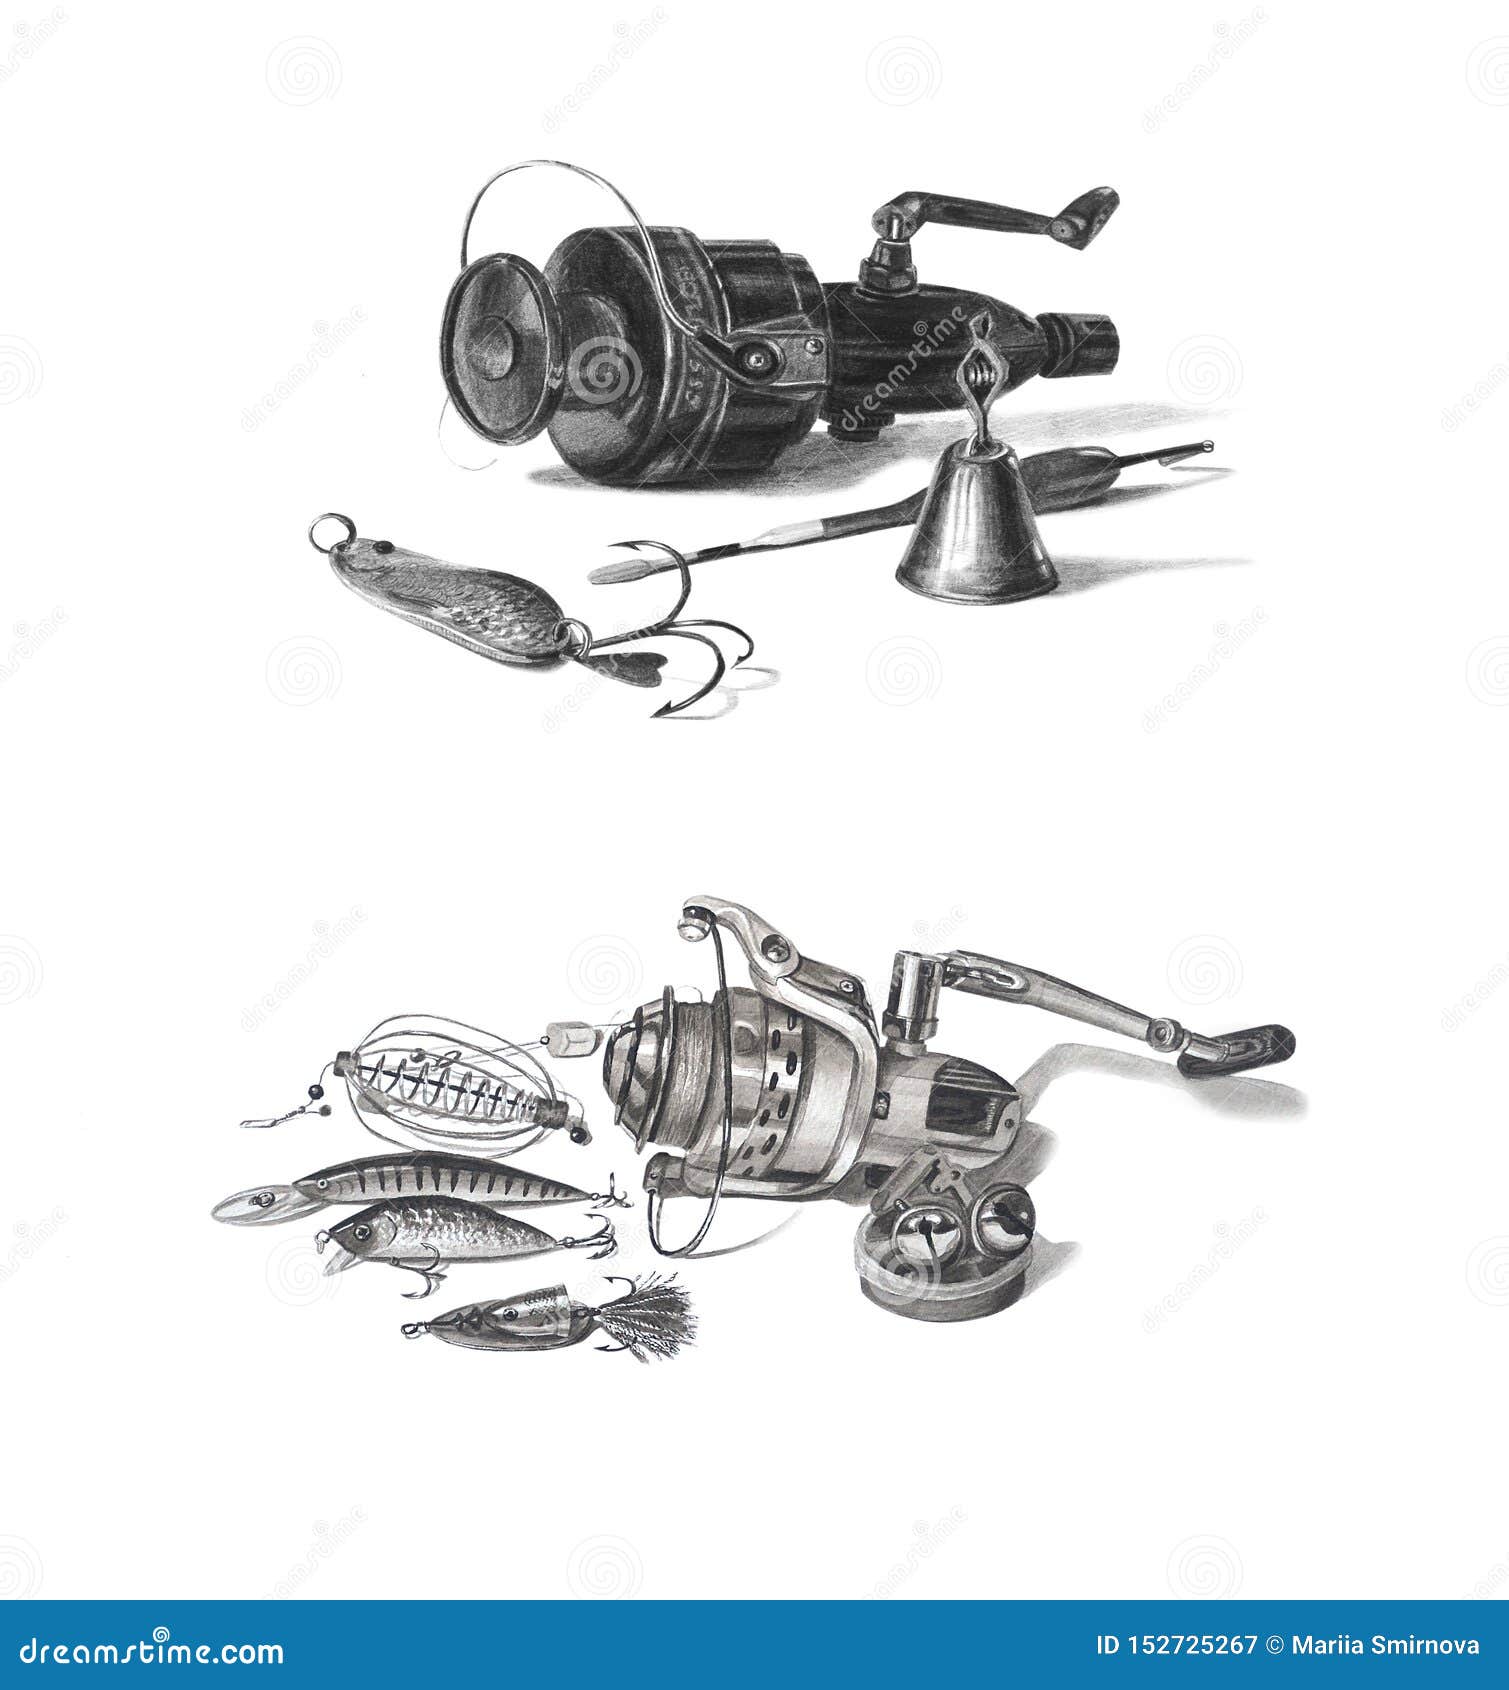 Beautifully Hand-drawn Fishing Gear Isolated on White. Fishing Reel, Bell,  Floats, Hooks, Bait. Stock Image - Image of black, tackle: 152725267